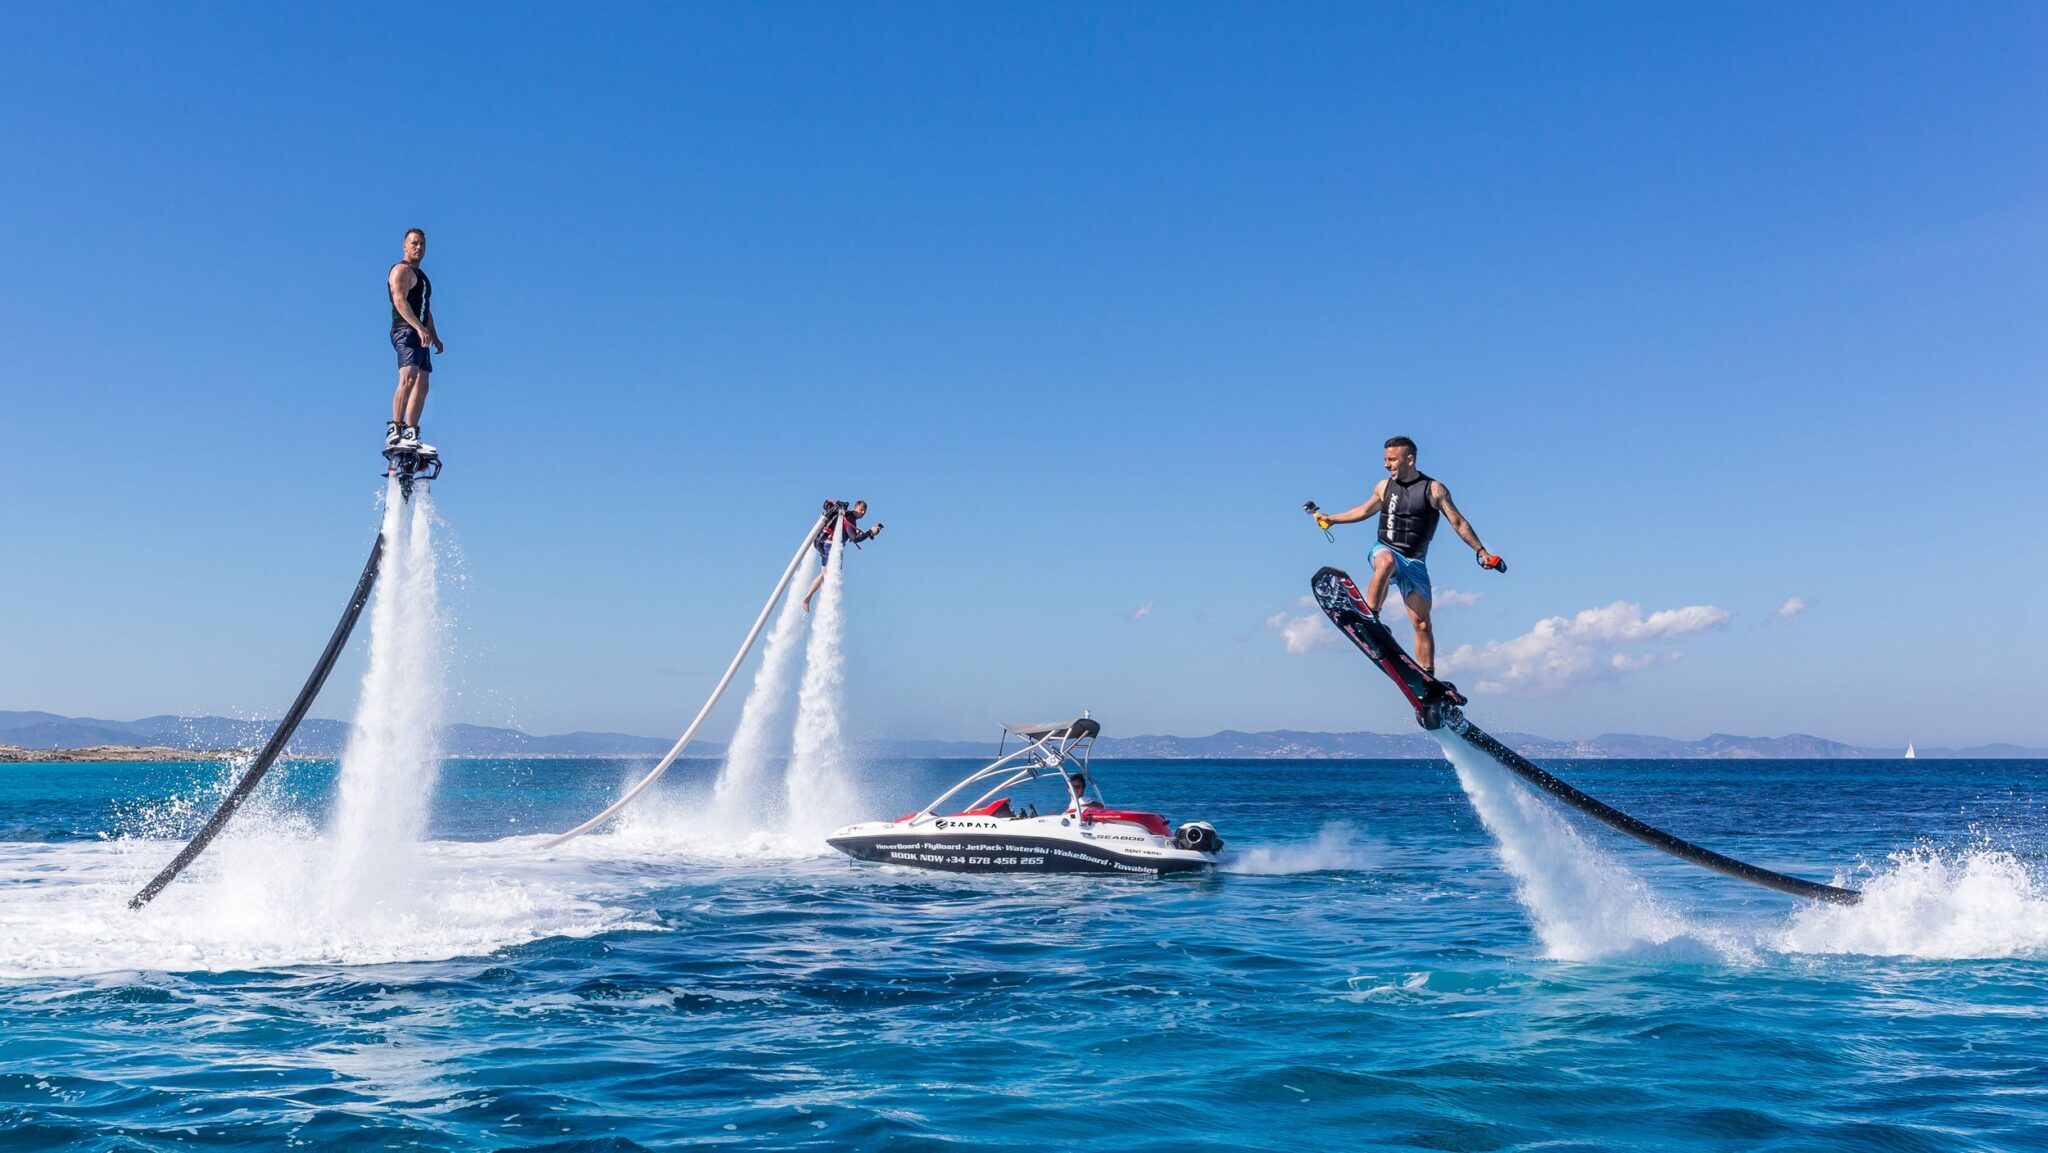 WATER JETPACK KITS by Zapata